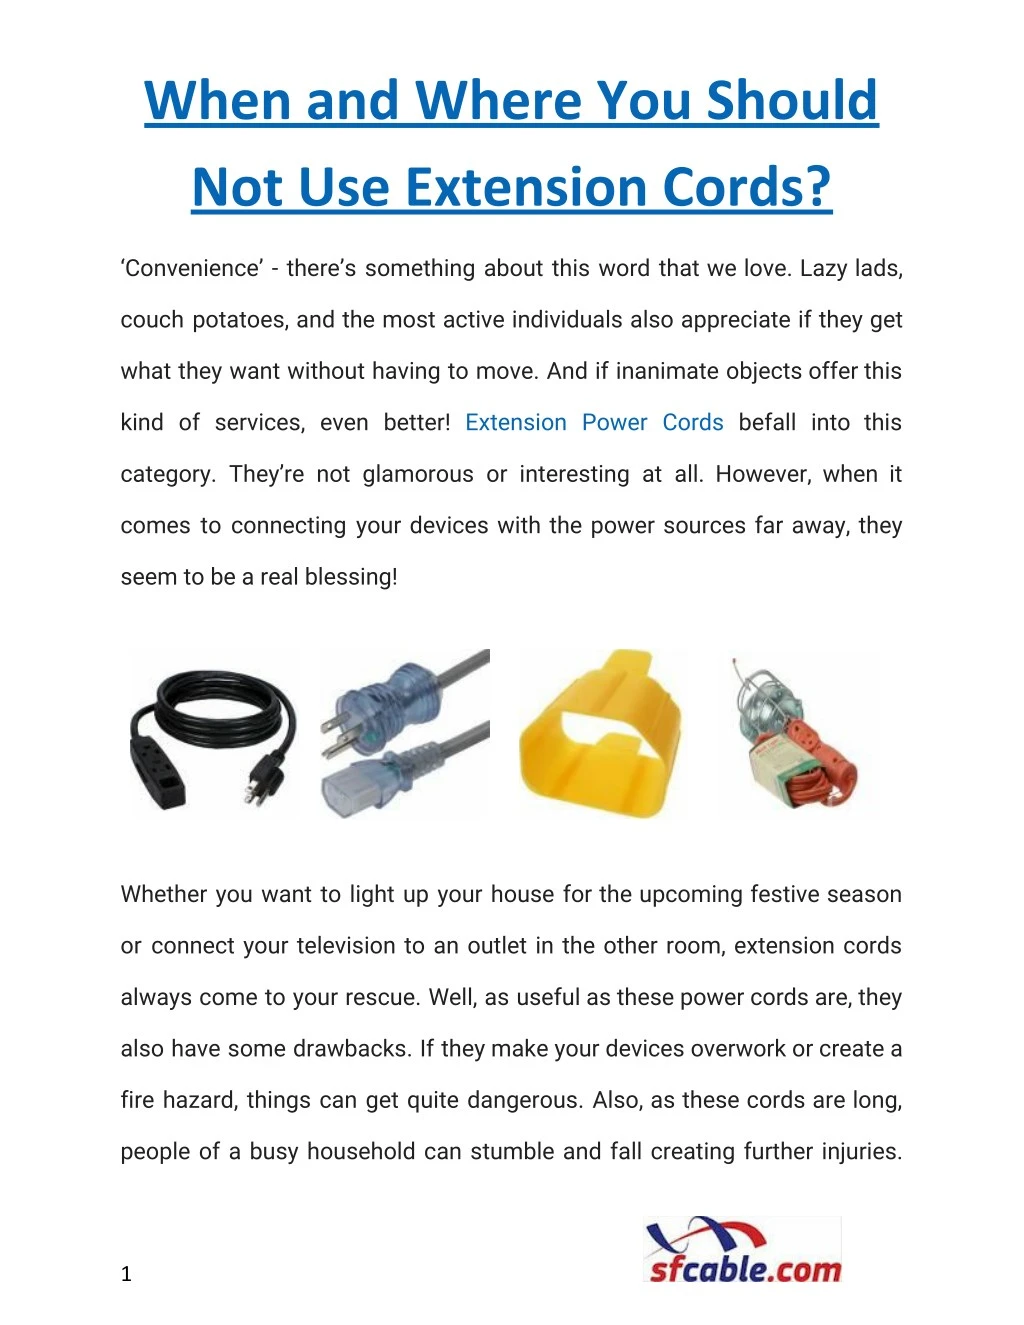 when and where you should not use extension cords